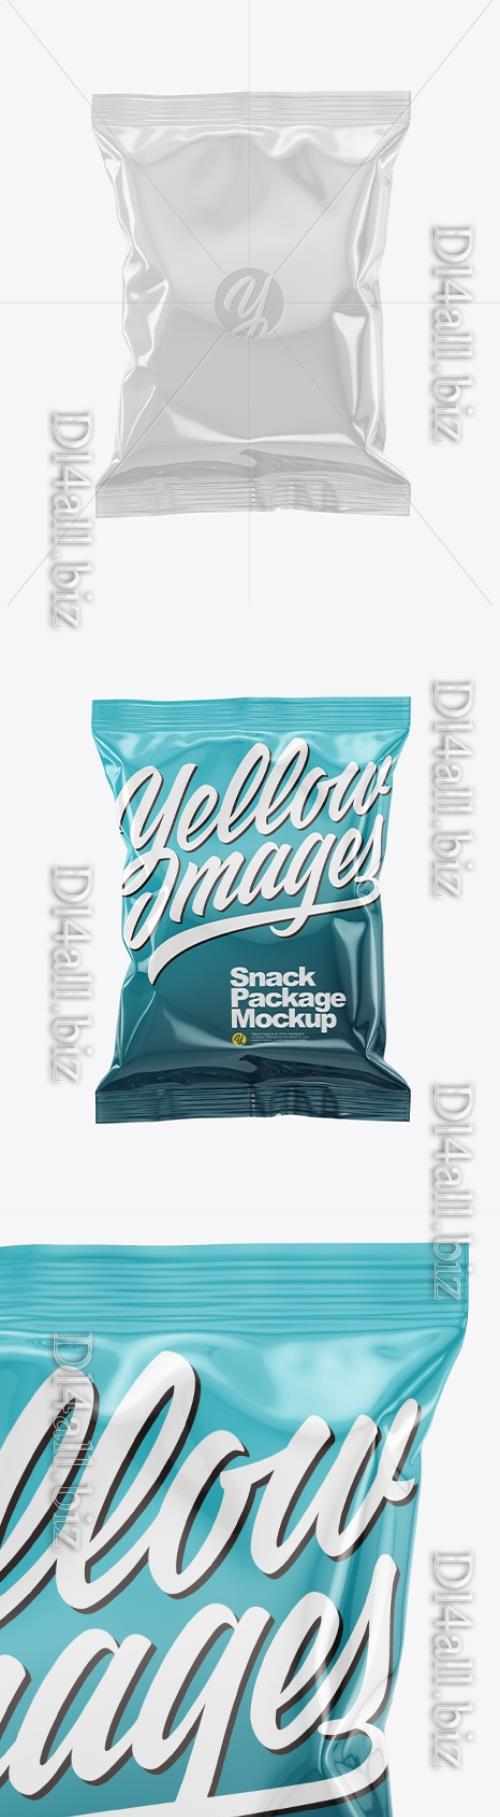 Glossy Snack Package Mockup 50510